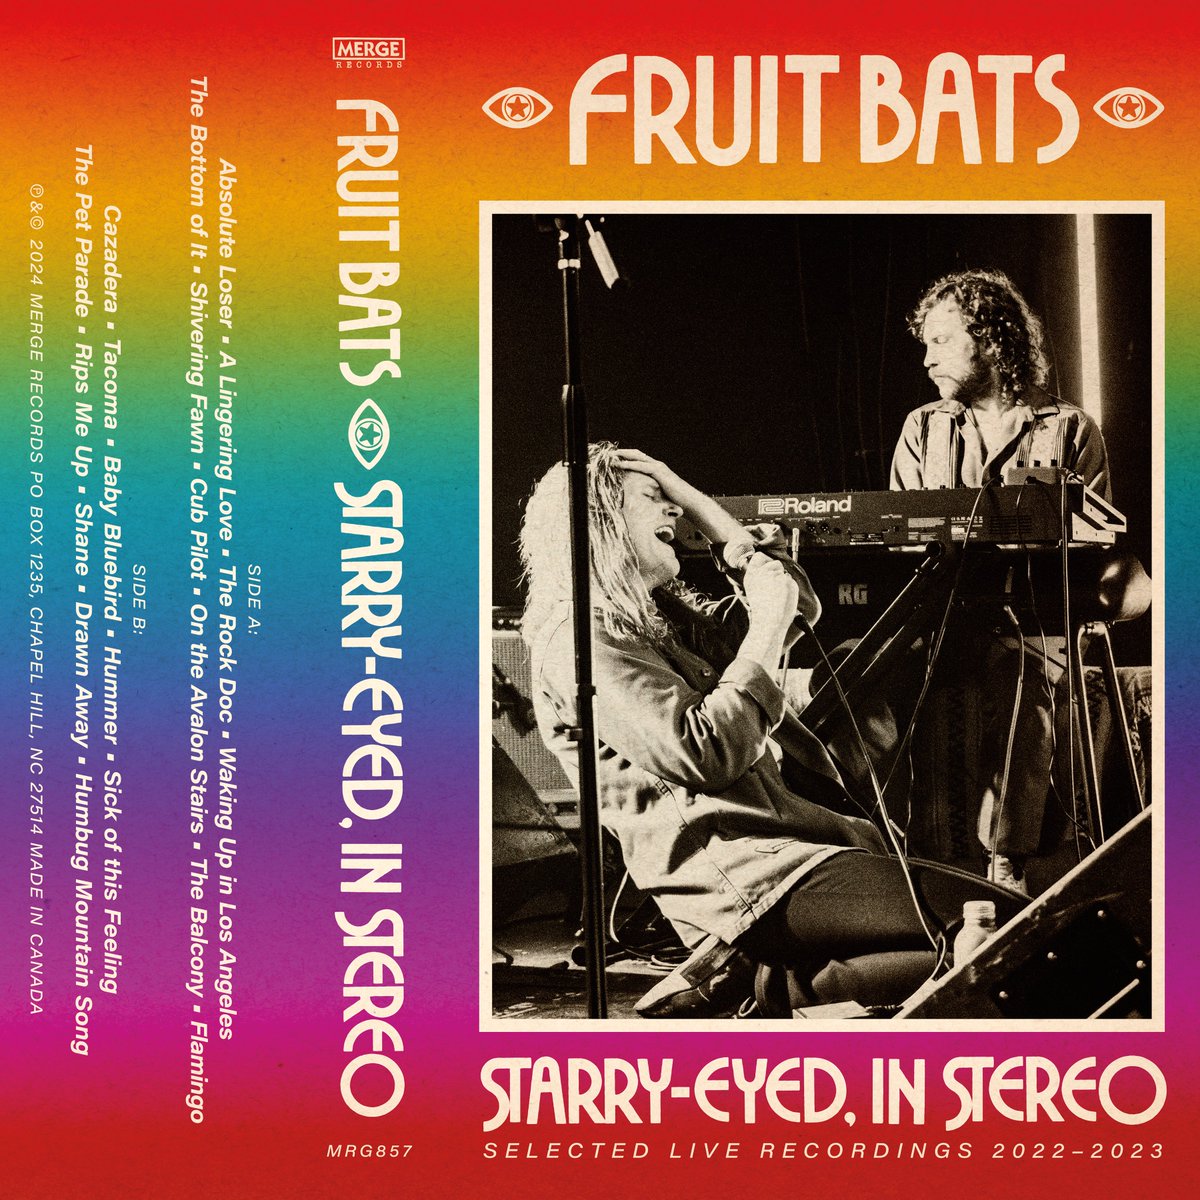 .@Fruit_Bats announce a new run of tour dates along with a surprise: 'Starry-eyed, in Stereo', 20 cuts from the past 2 years of live shows, assembled on one tour-exclusive cassette! Lead single 'On the Avalon Stairs' is streaming everywhere now: lnk.to/Starry-eyed ✨